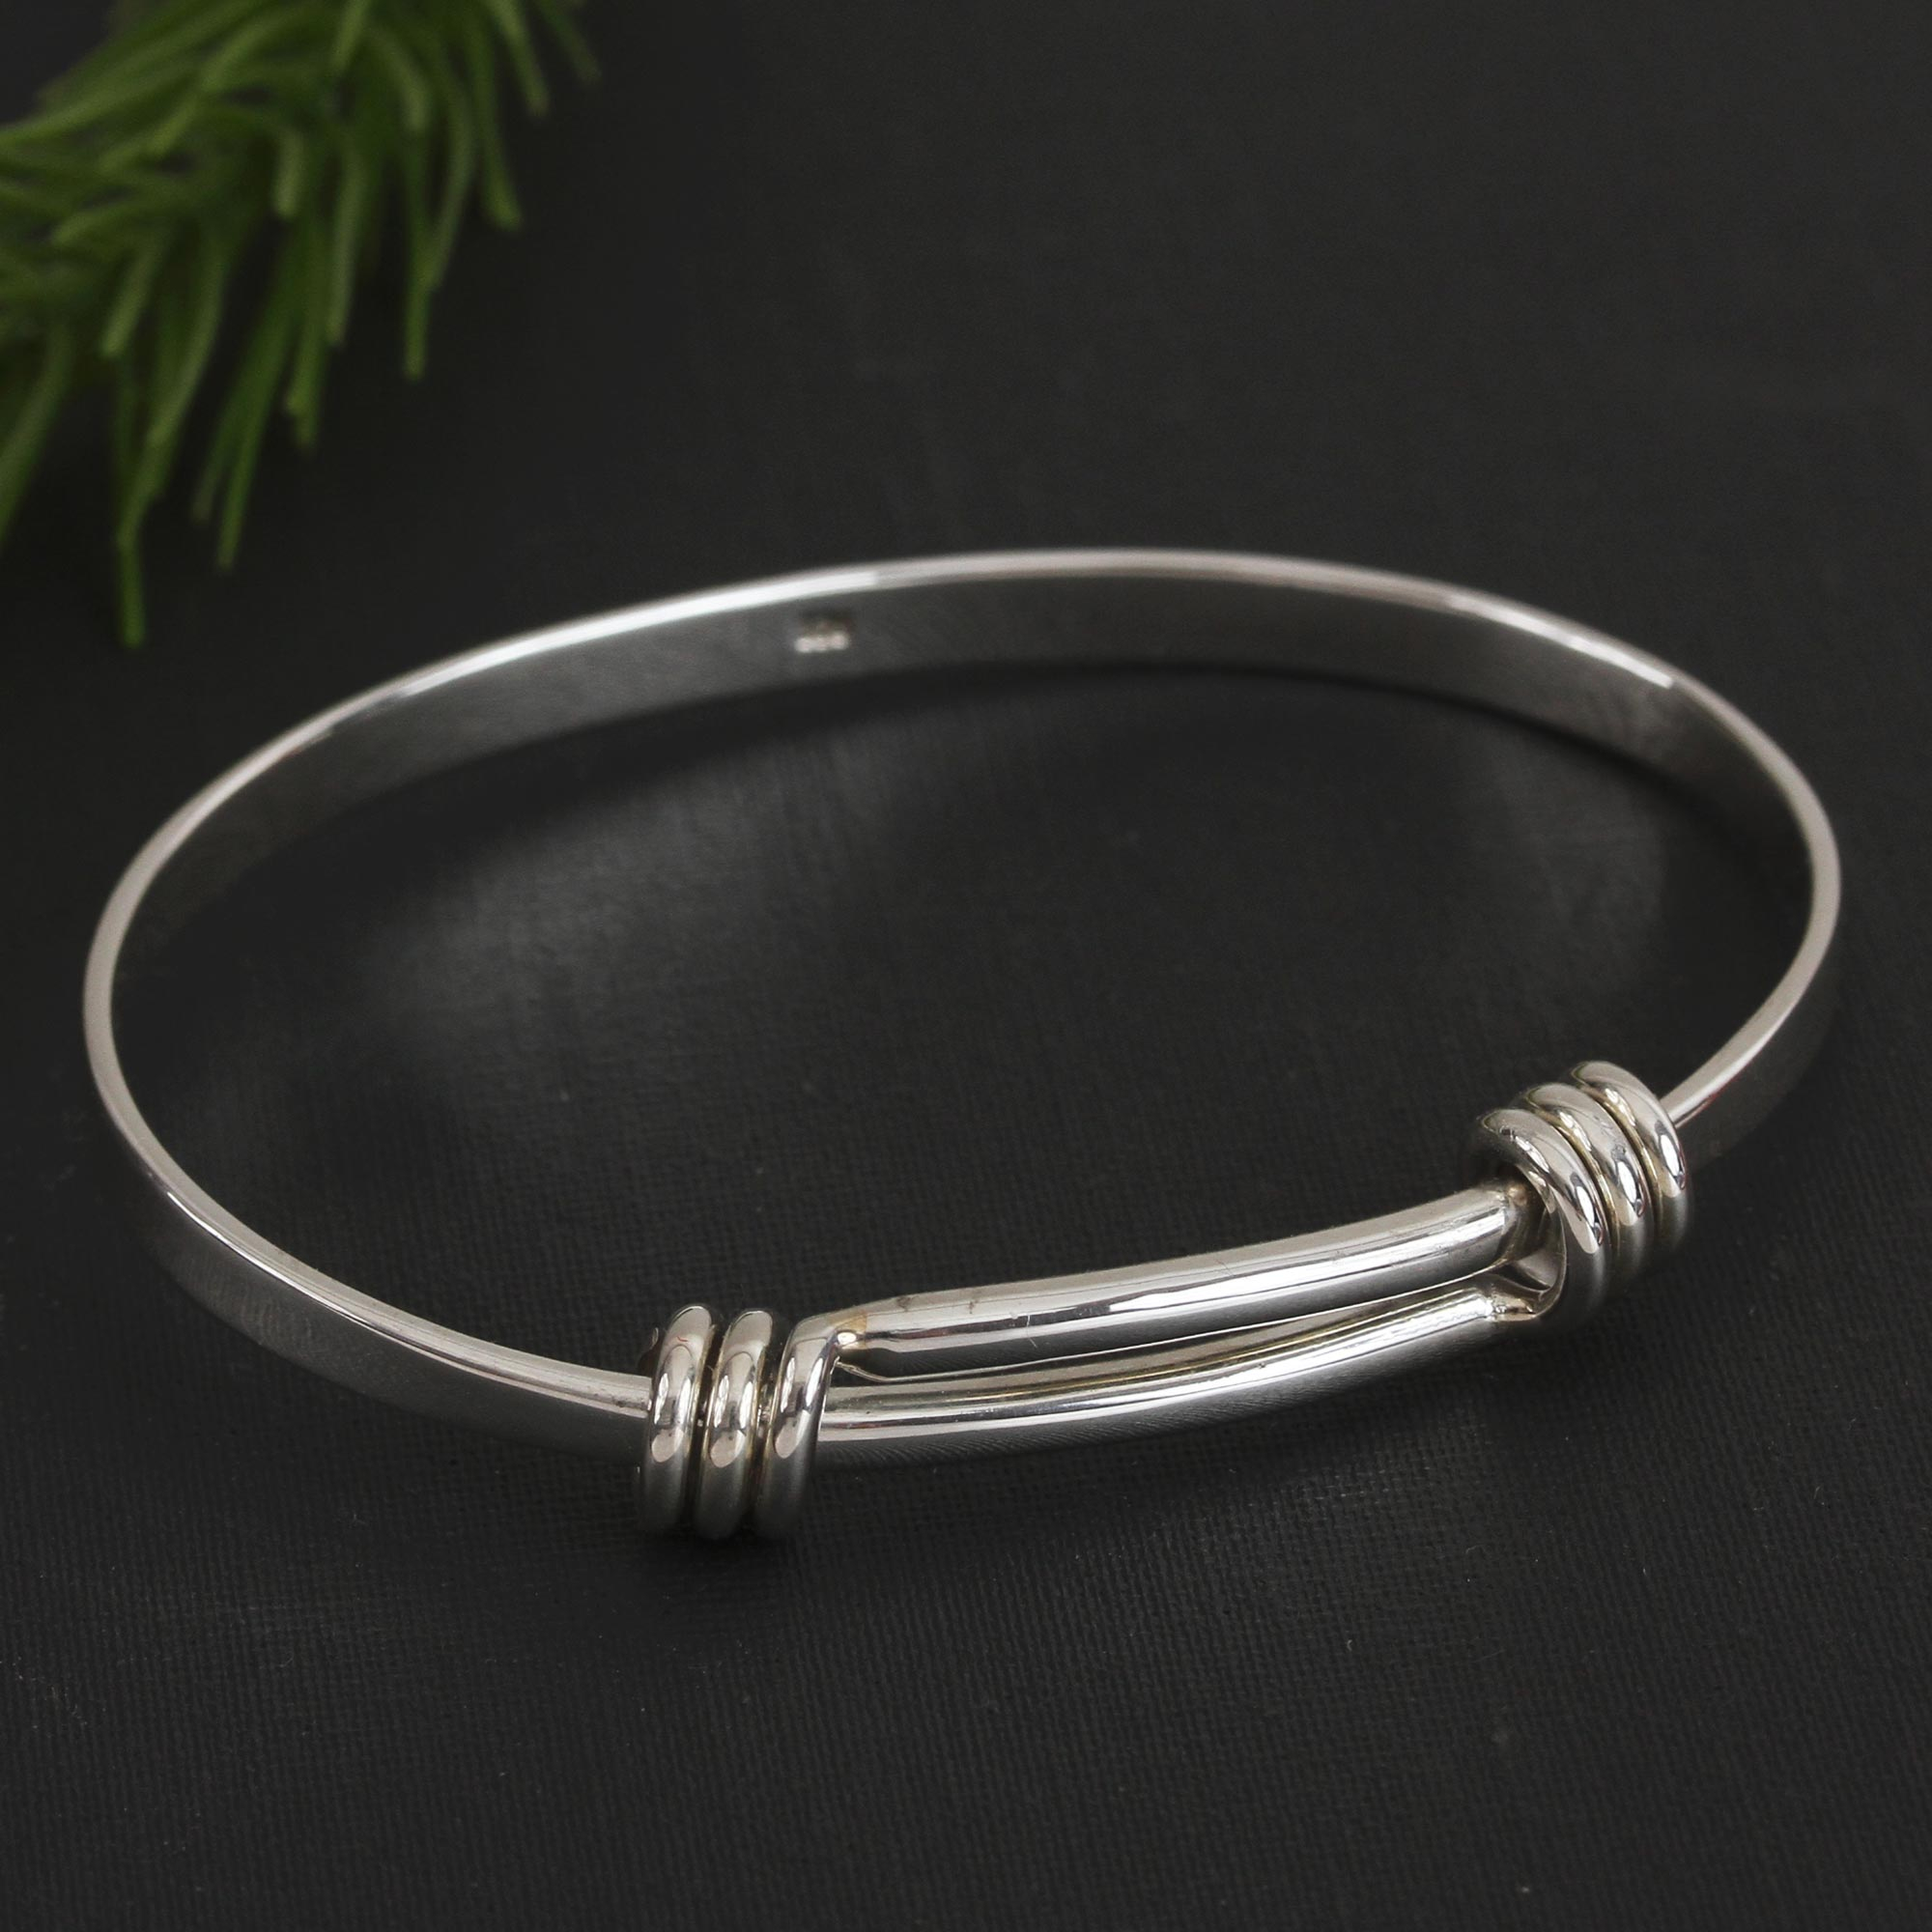 Simple Sterling Silver Bangle Bracelet Crafted in Mexico